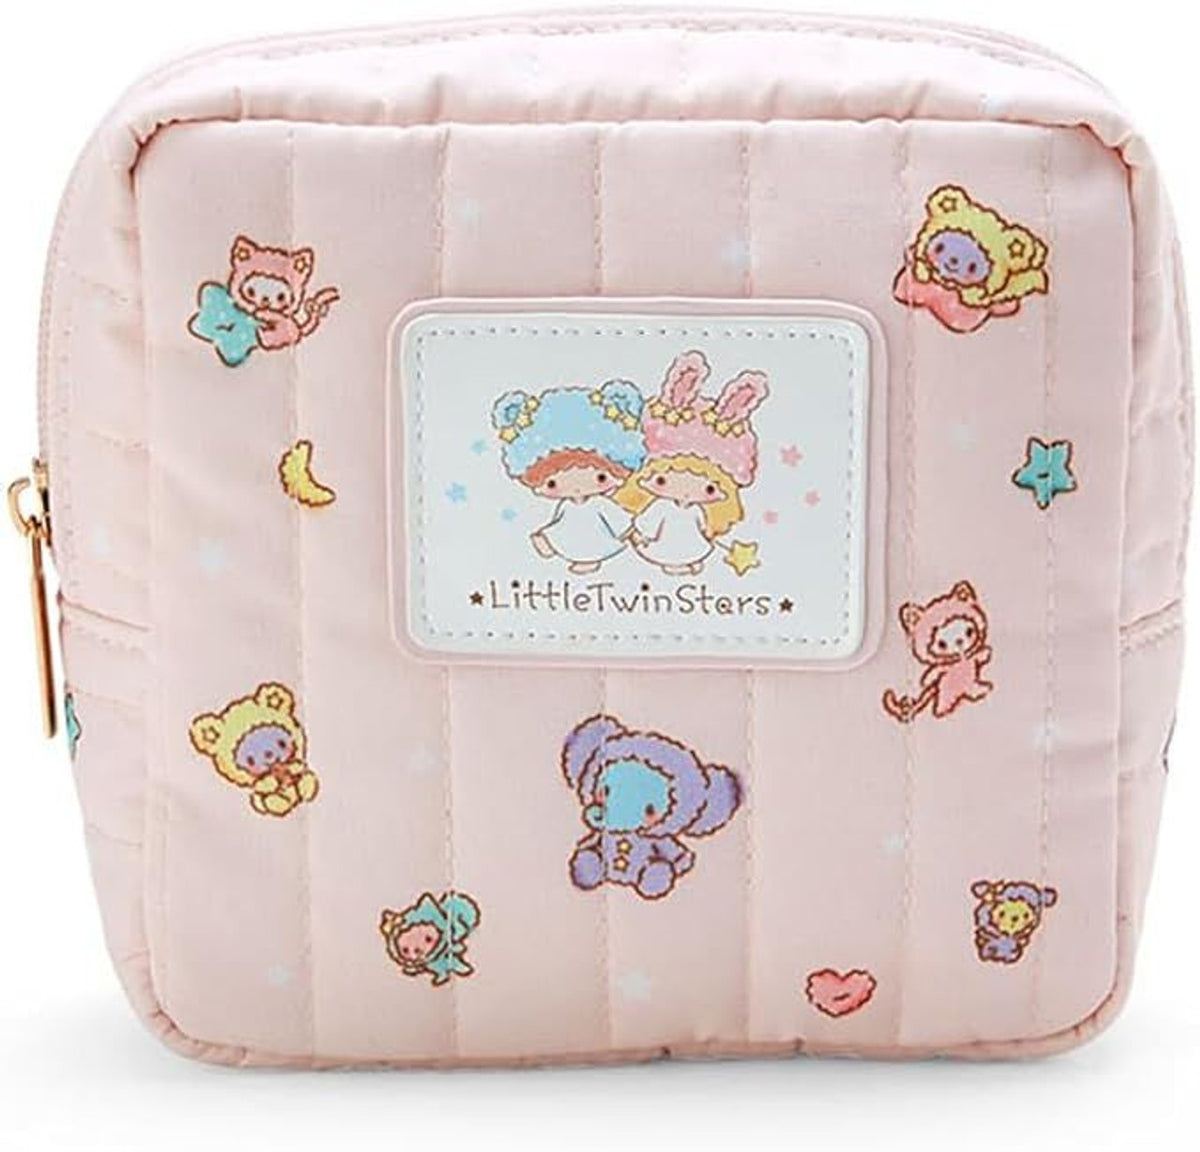 Little Twin Stars Peachy Pouch (Limited Japan Edition)